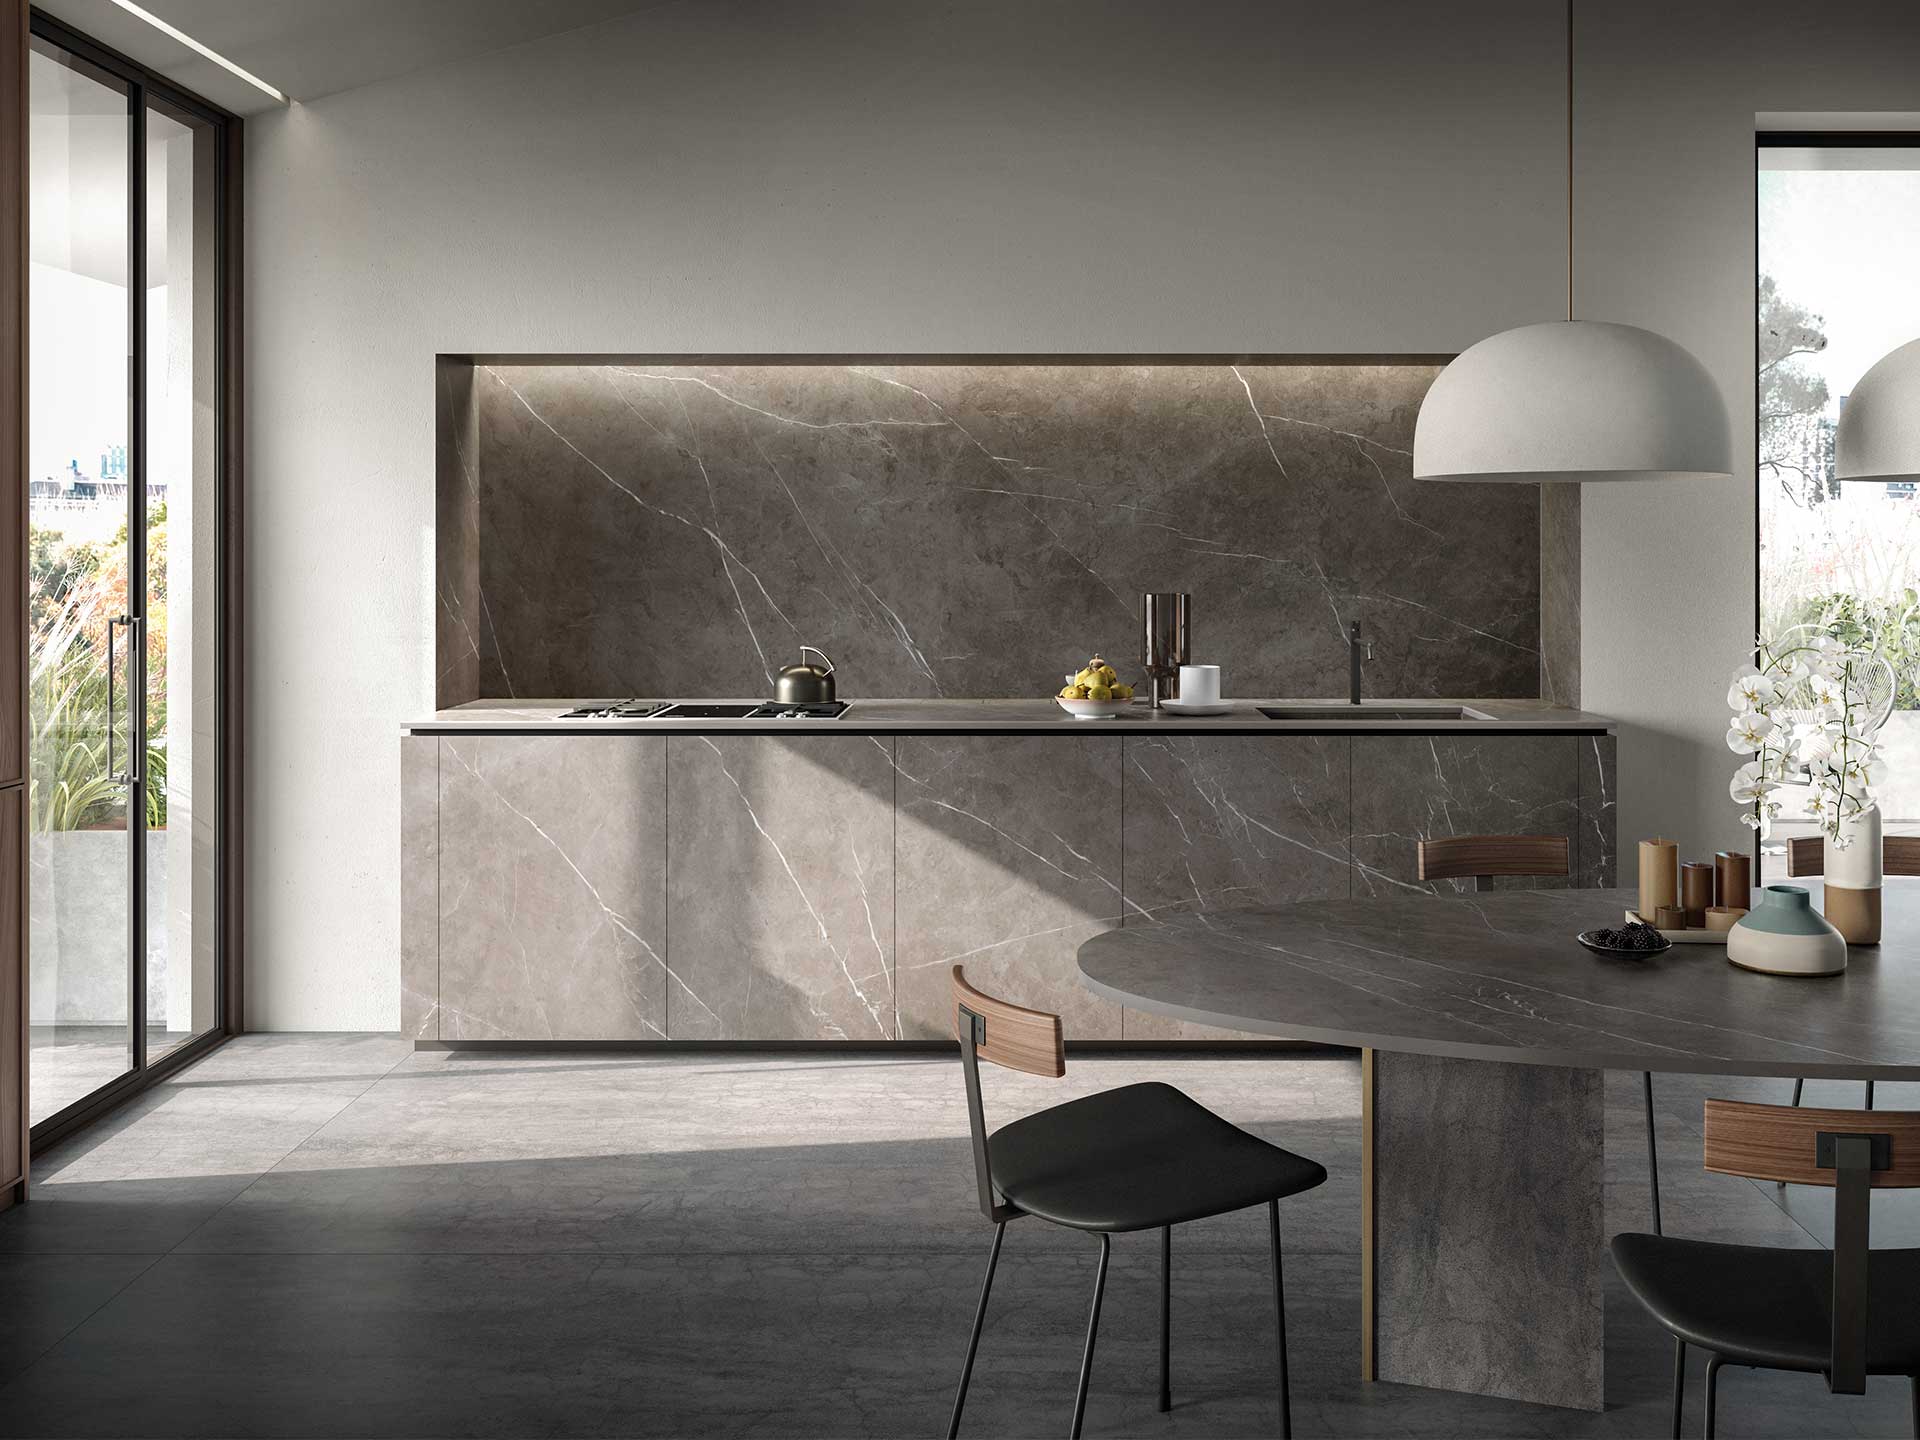 Laminam create beautiful porcelain worktops. A must kitchen trend for 2024